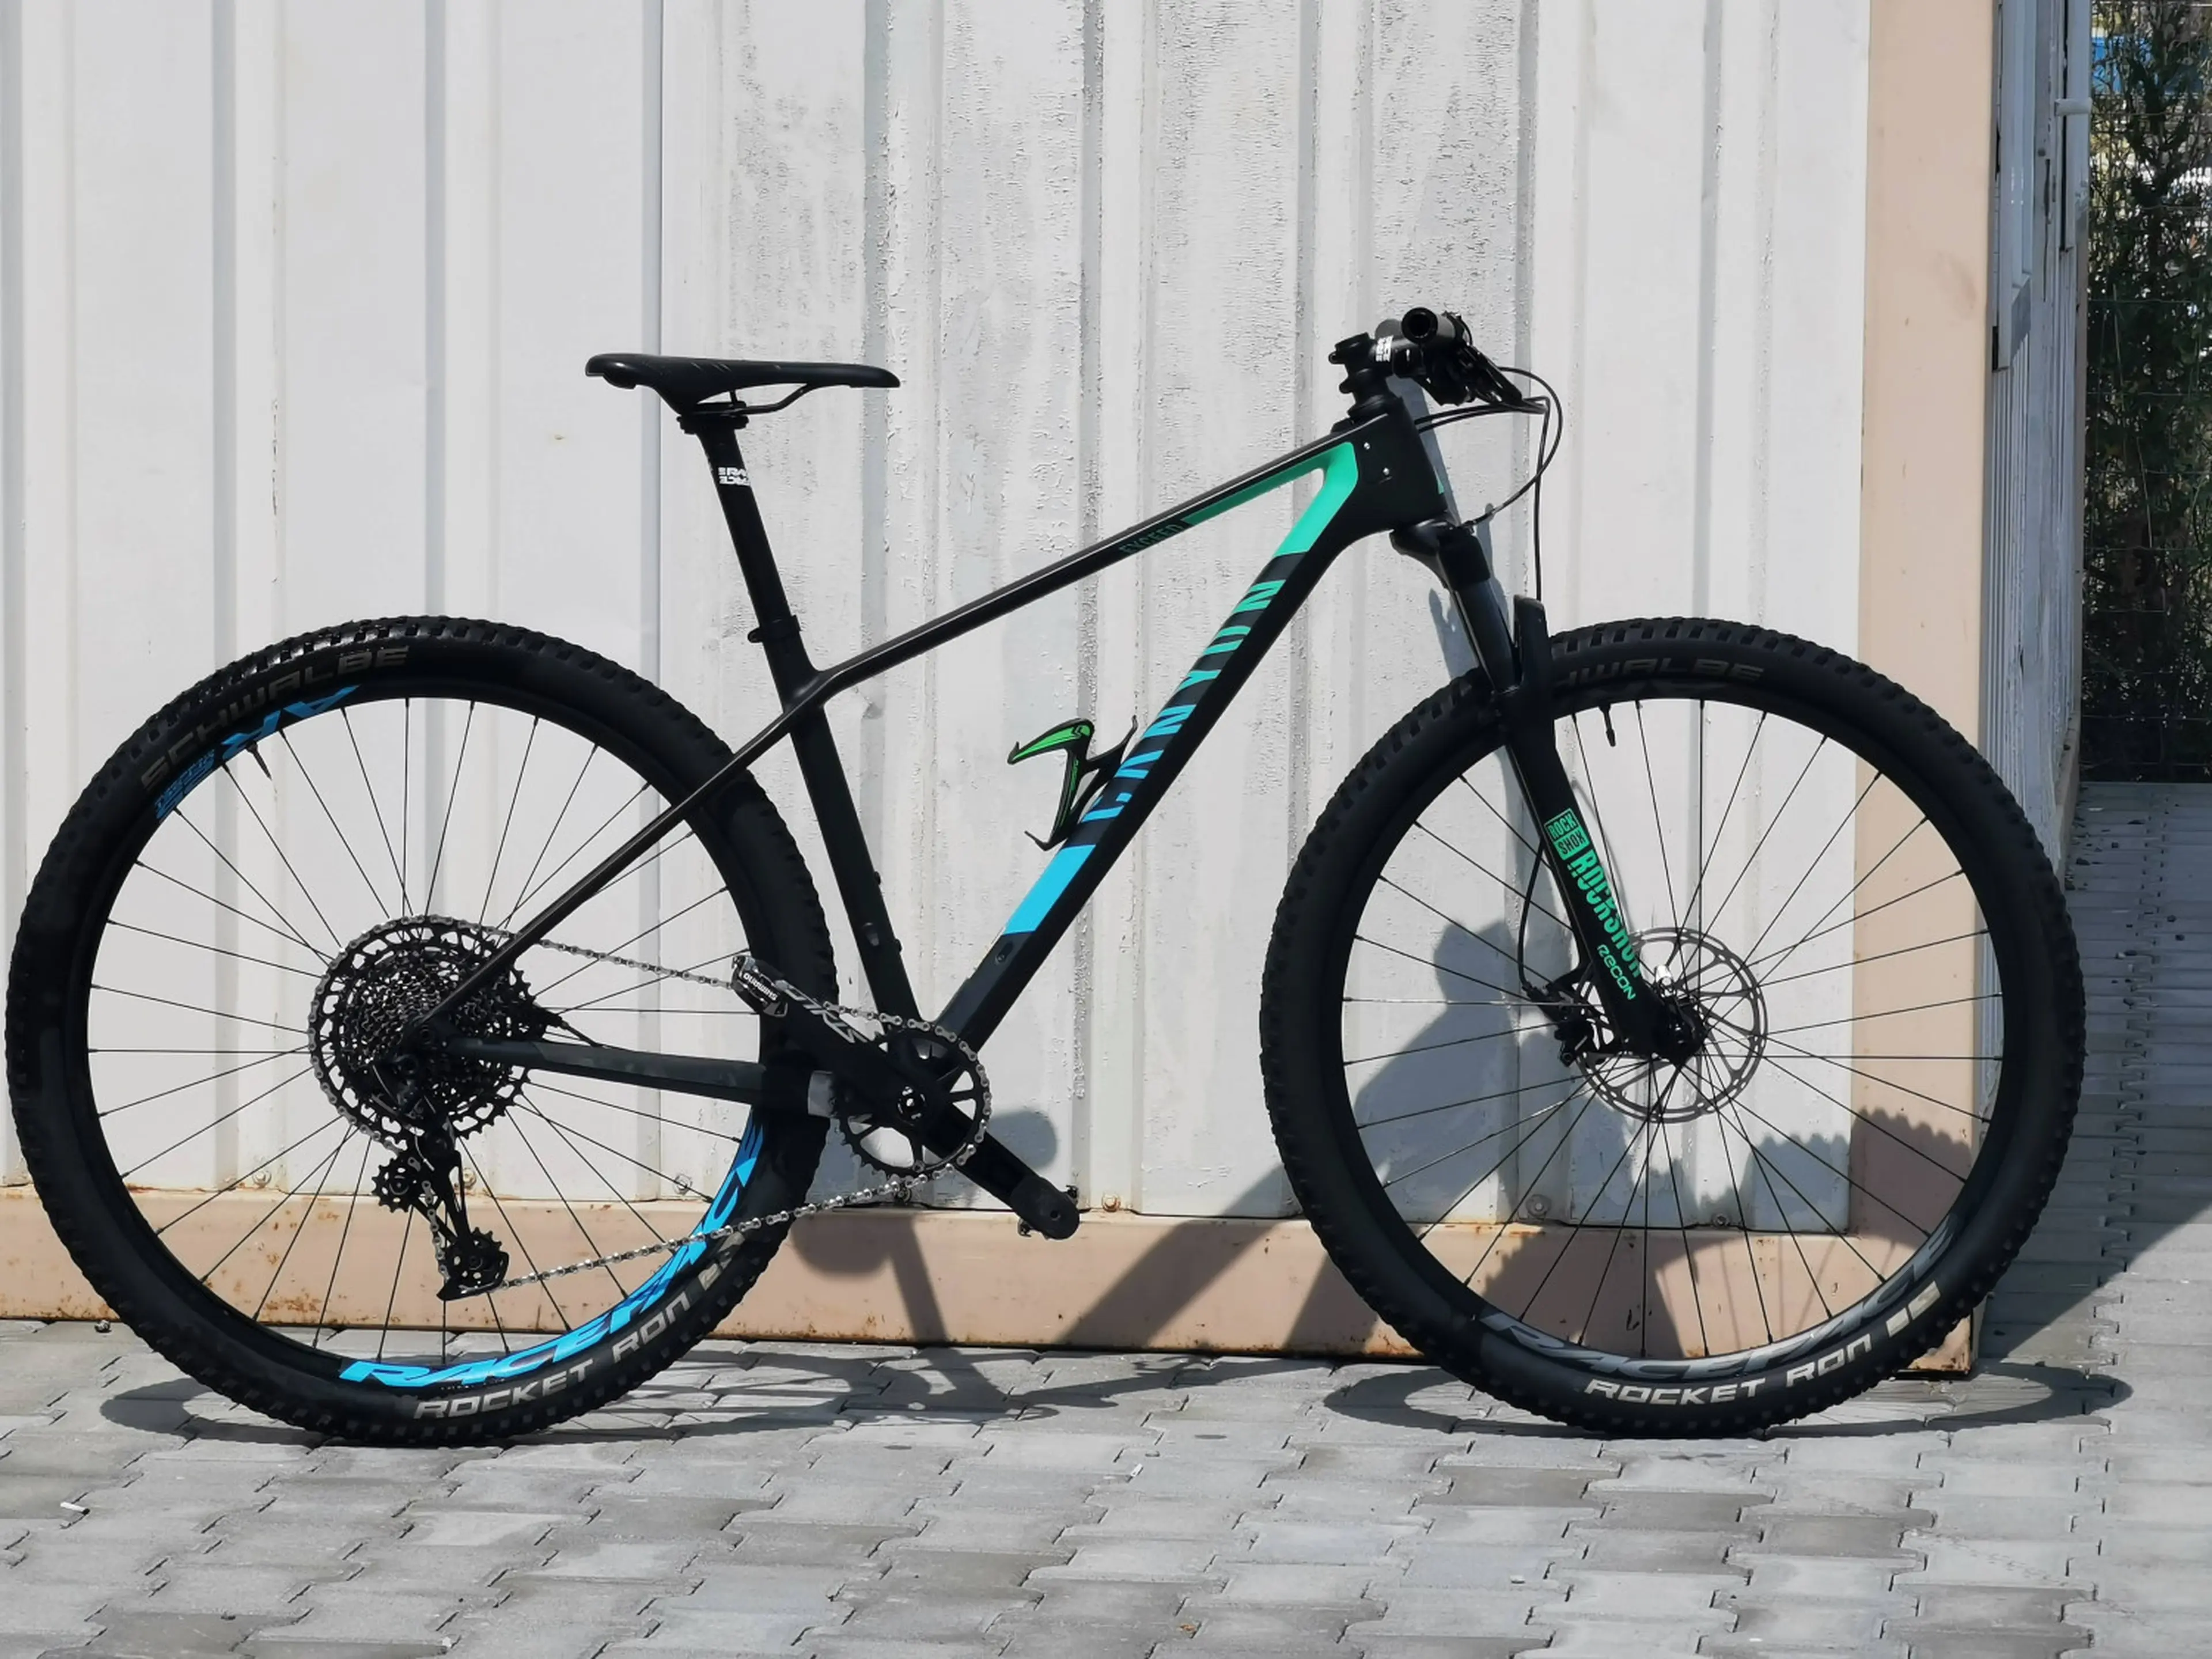 1. Canyon Exceed Carbon race